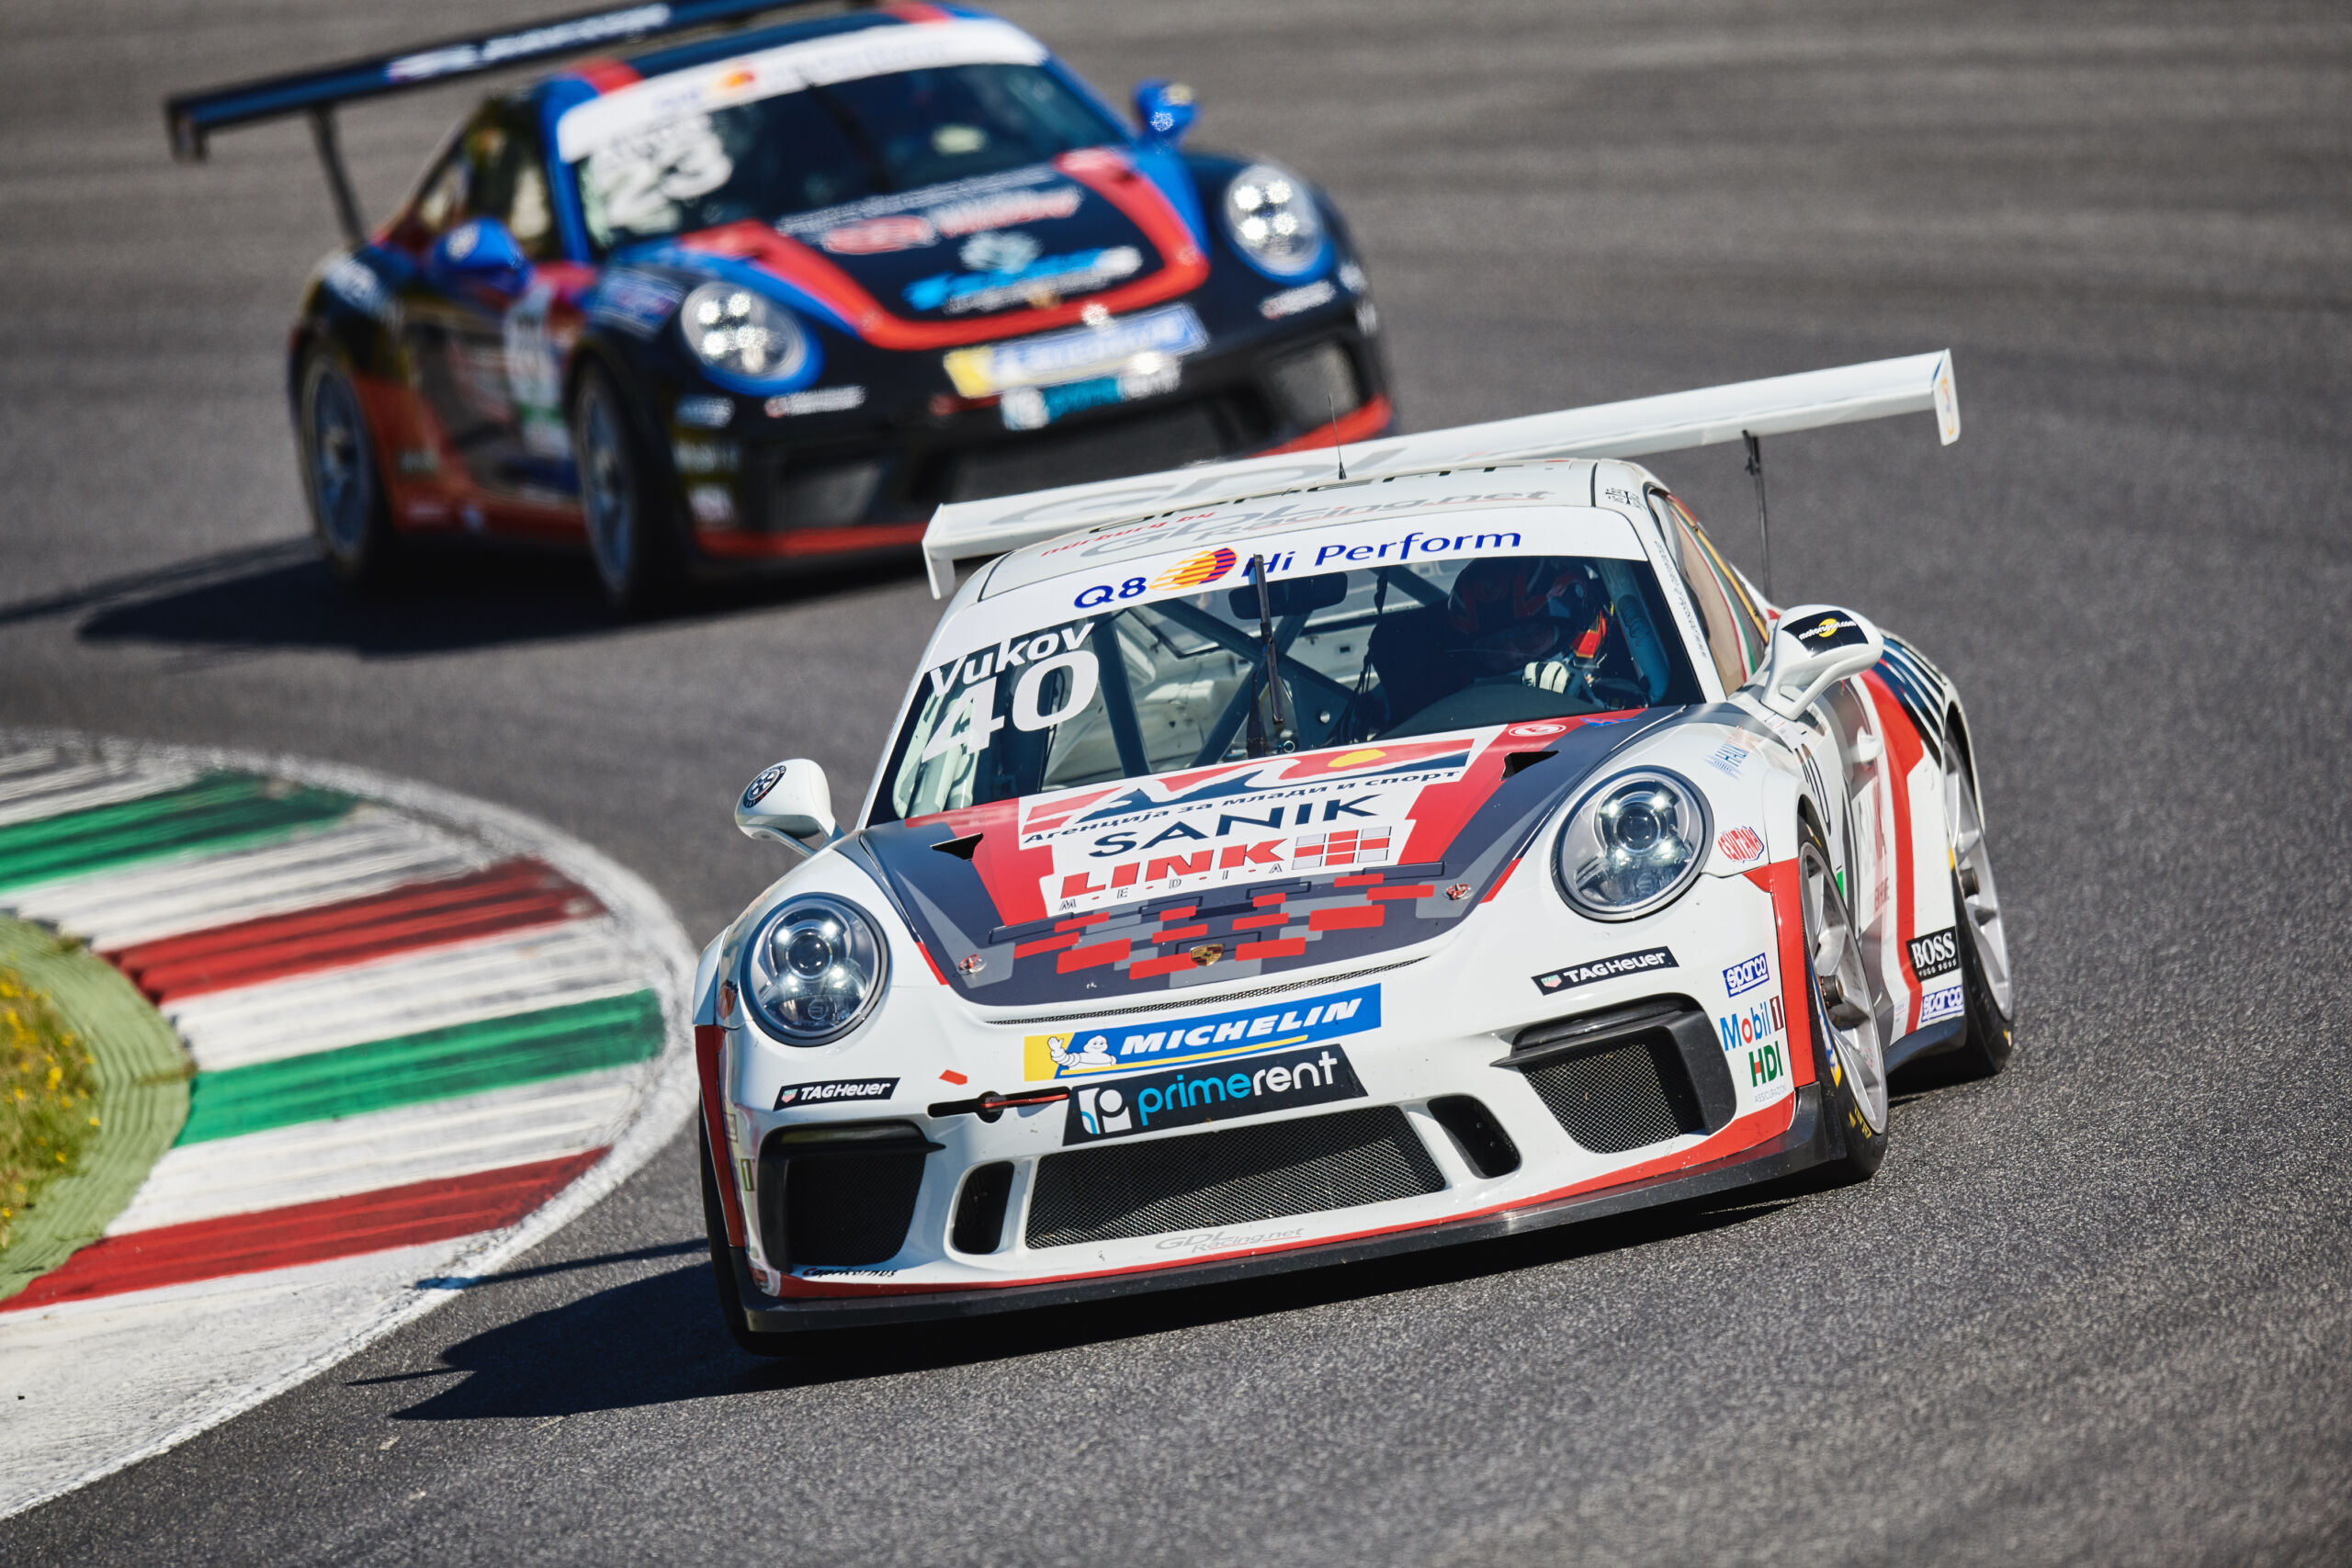 GDL Racing heads to Misano for round 2 of Carrera Cup Italia